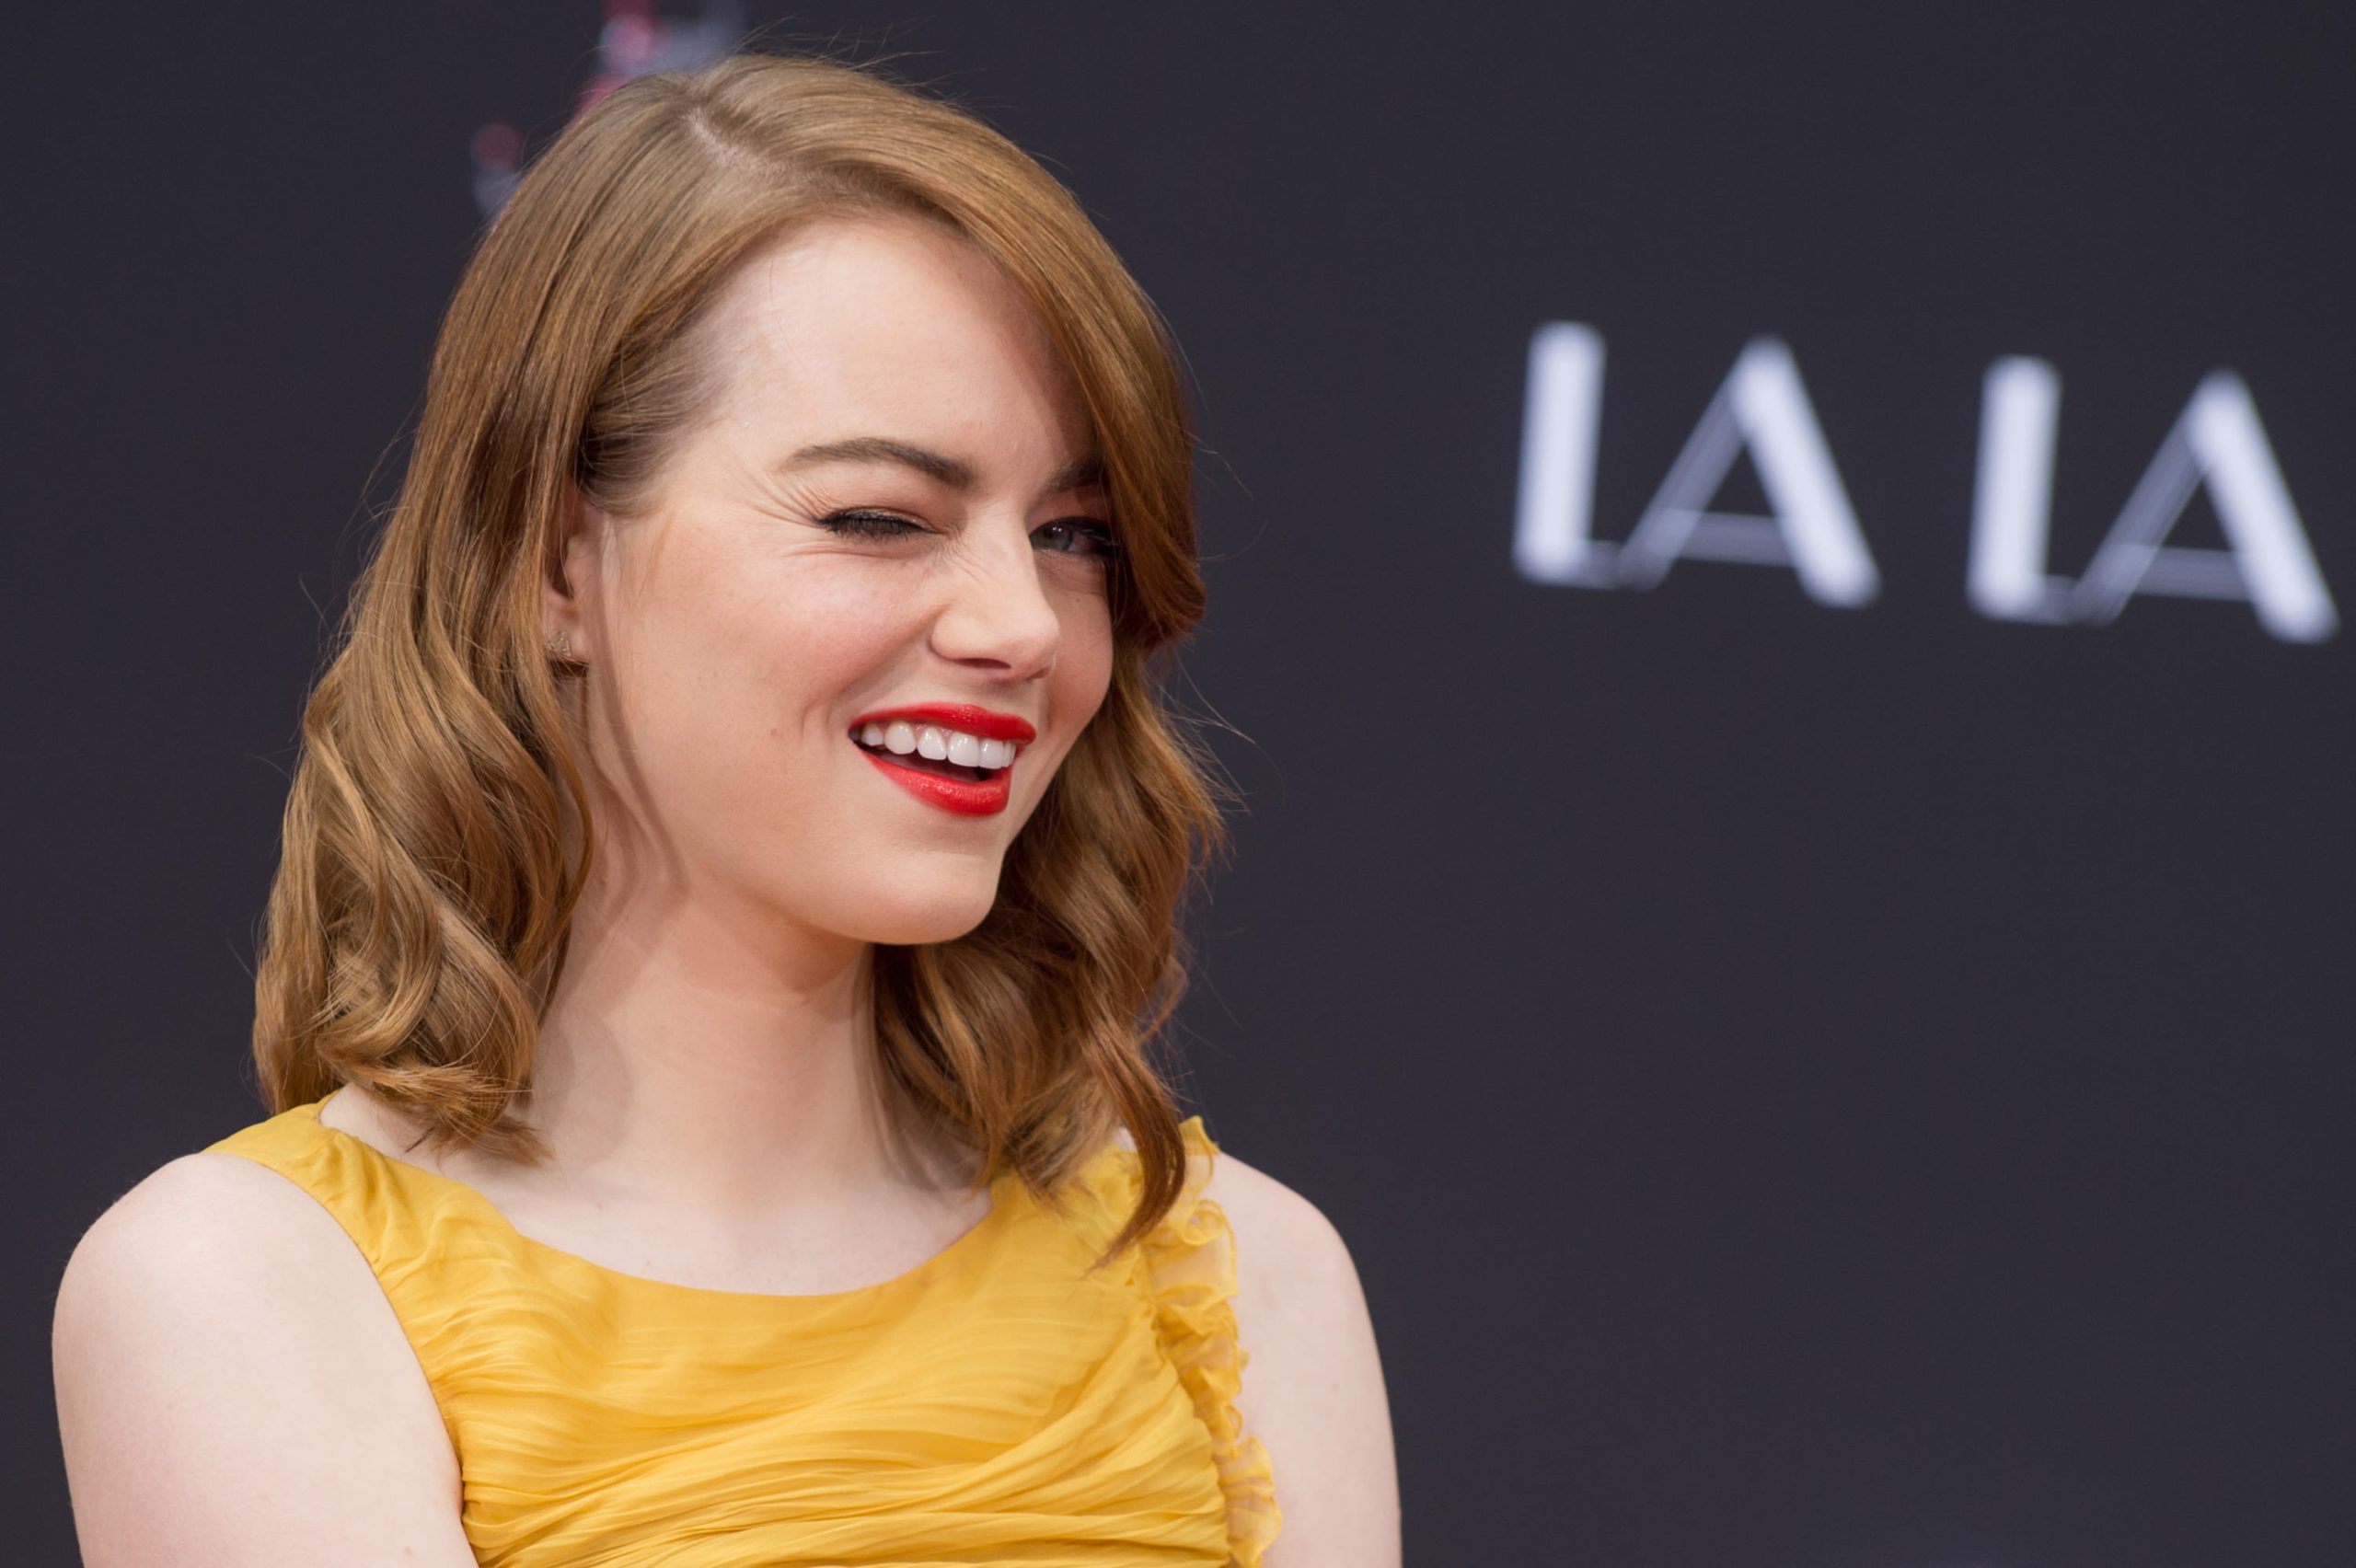 Emma Stone Wiki, Bio, Age, Net Worth, and Other Facts